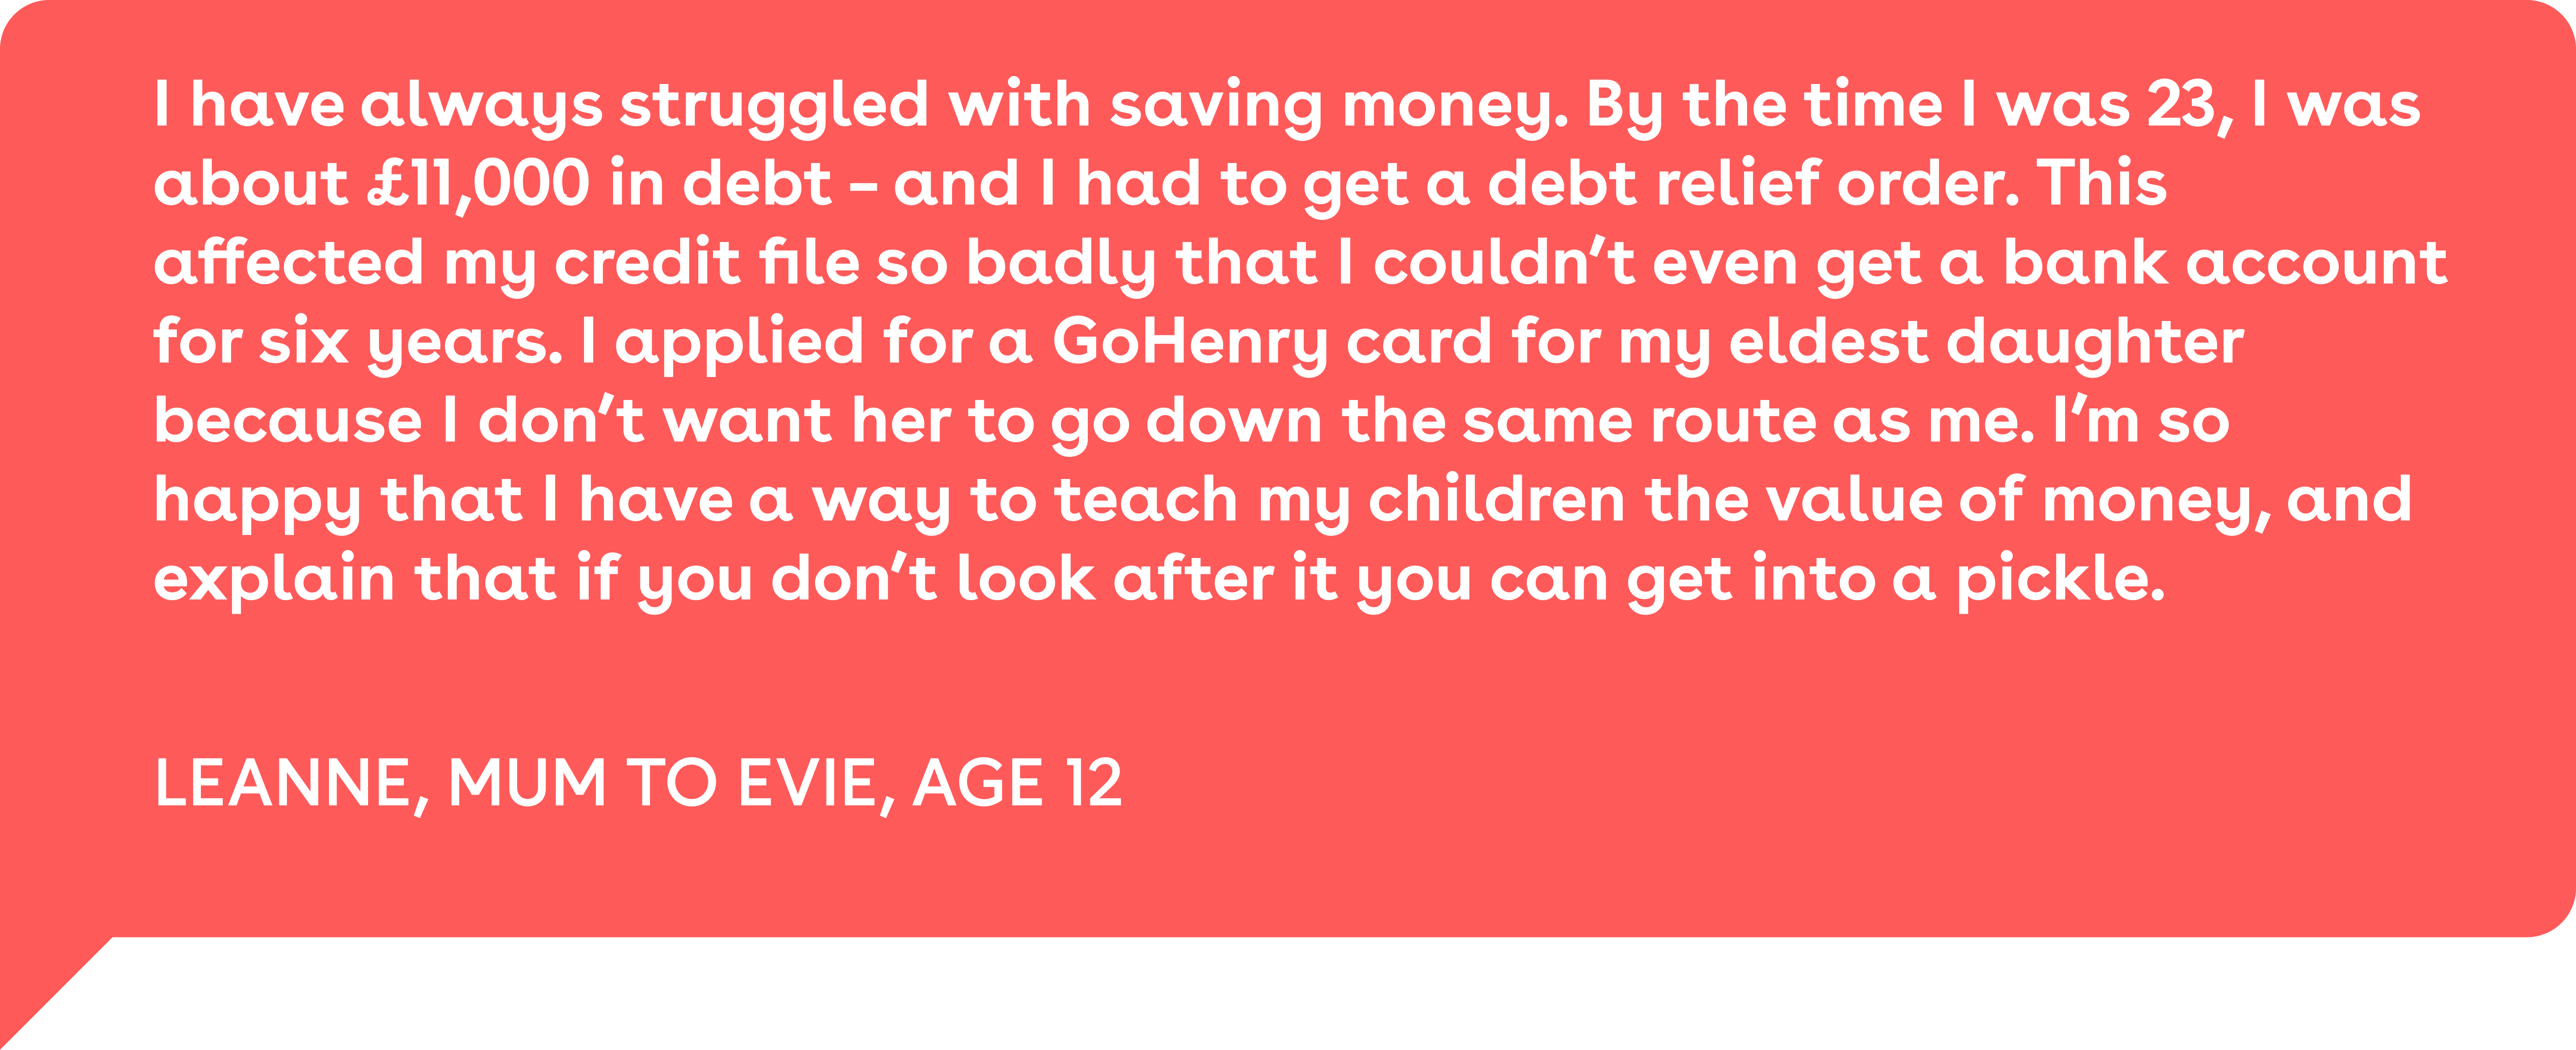 GoHenry Money Missions how to teach kids to save money